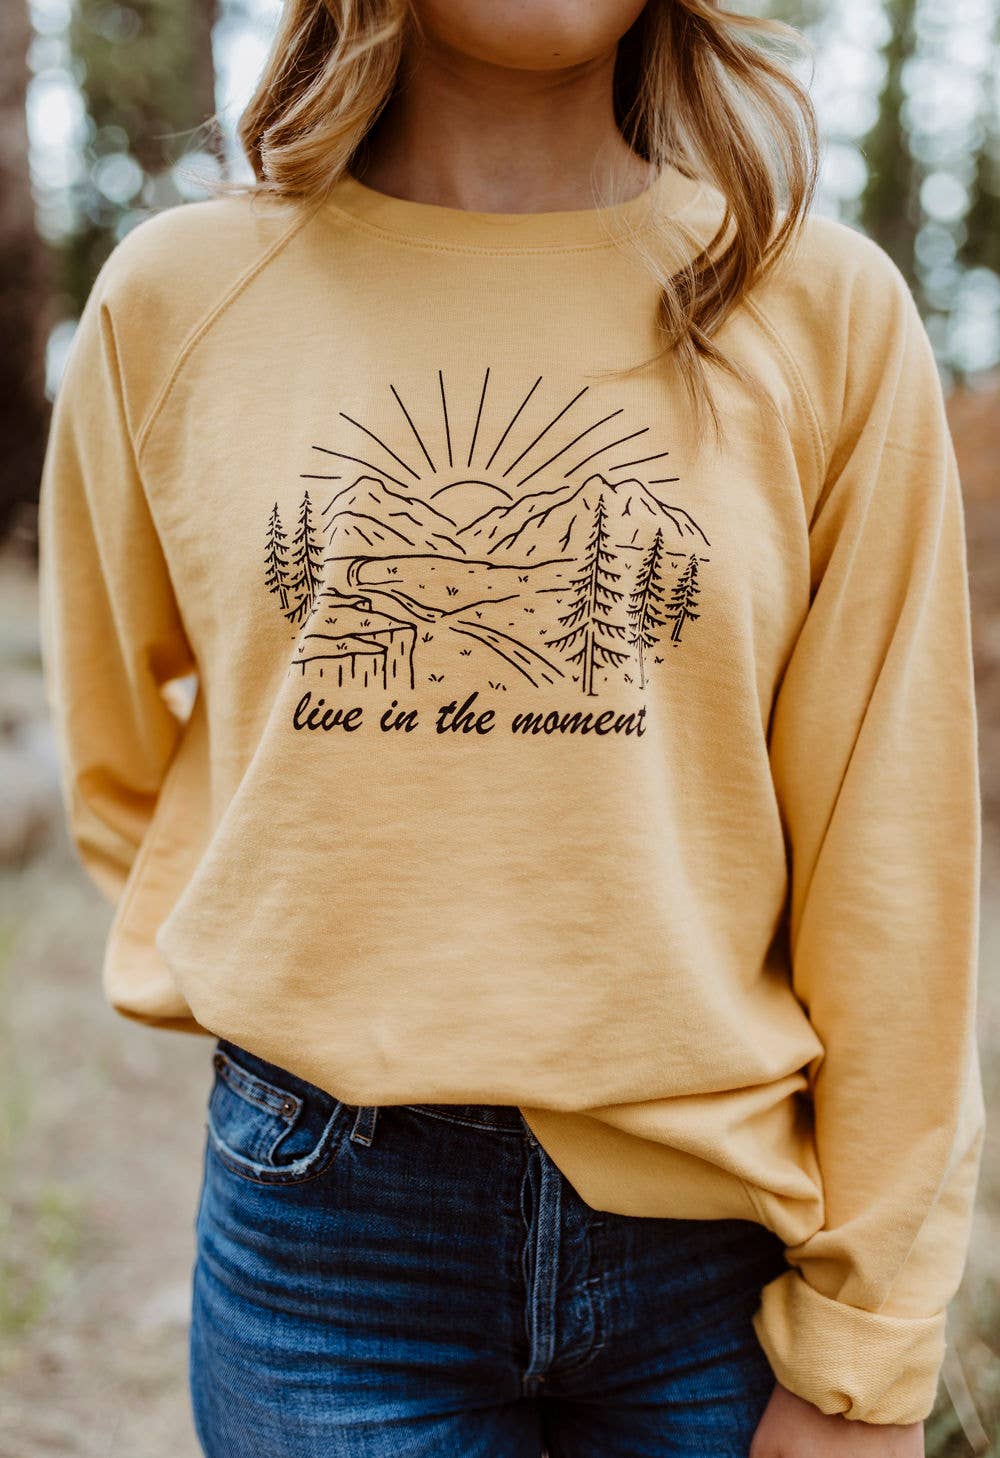 Yellow pullover. Mountain landscape in black linework, with text "live in the moment" under graphic.